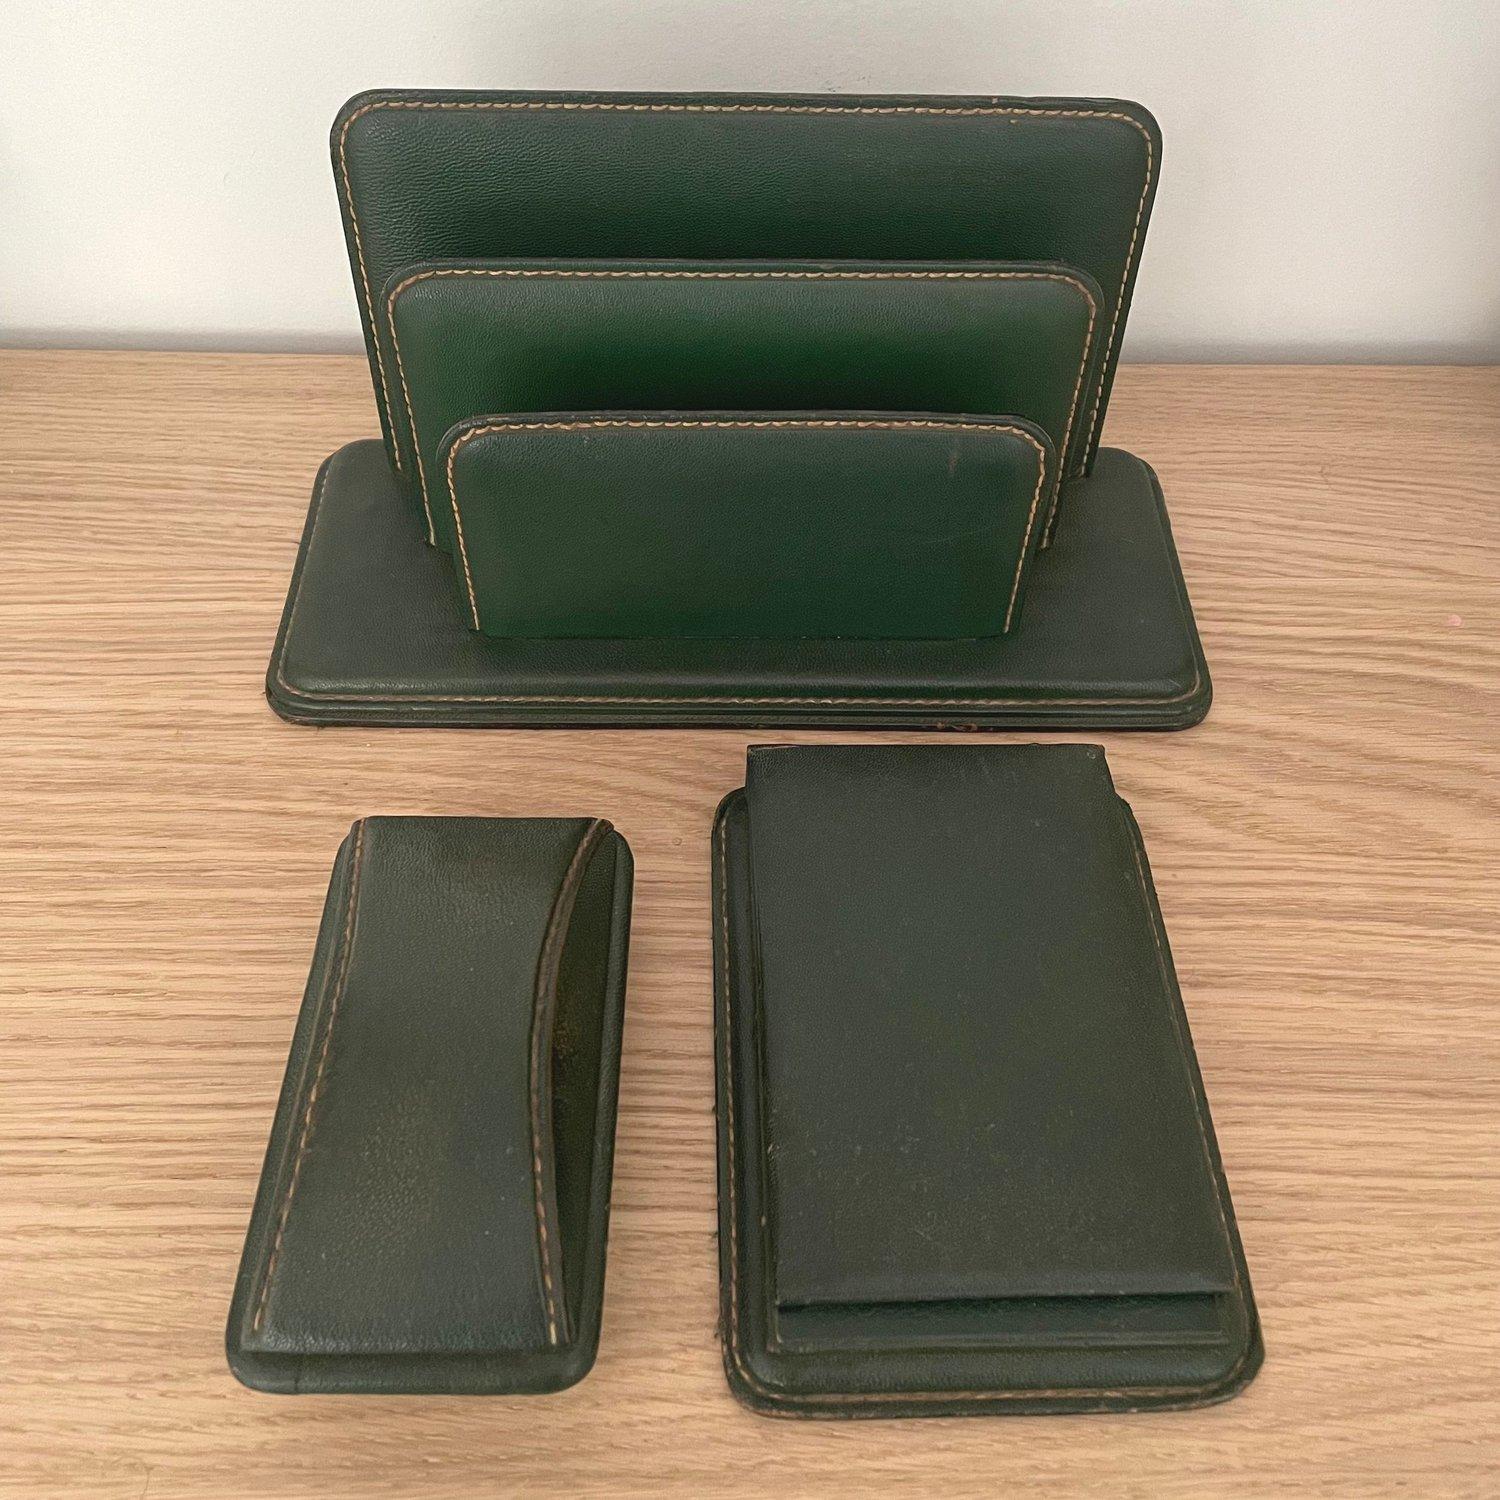 French leather desk set in the style of Jacques Adnet.
Forest green leather with contrast stitching.
Patina from age and use.
Natural color variations within the distressed leather.
Perfectly worn in.
Rich with character and charm.

Three